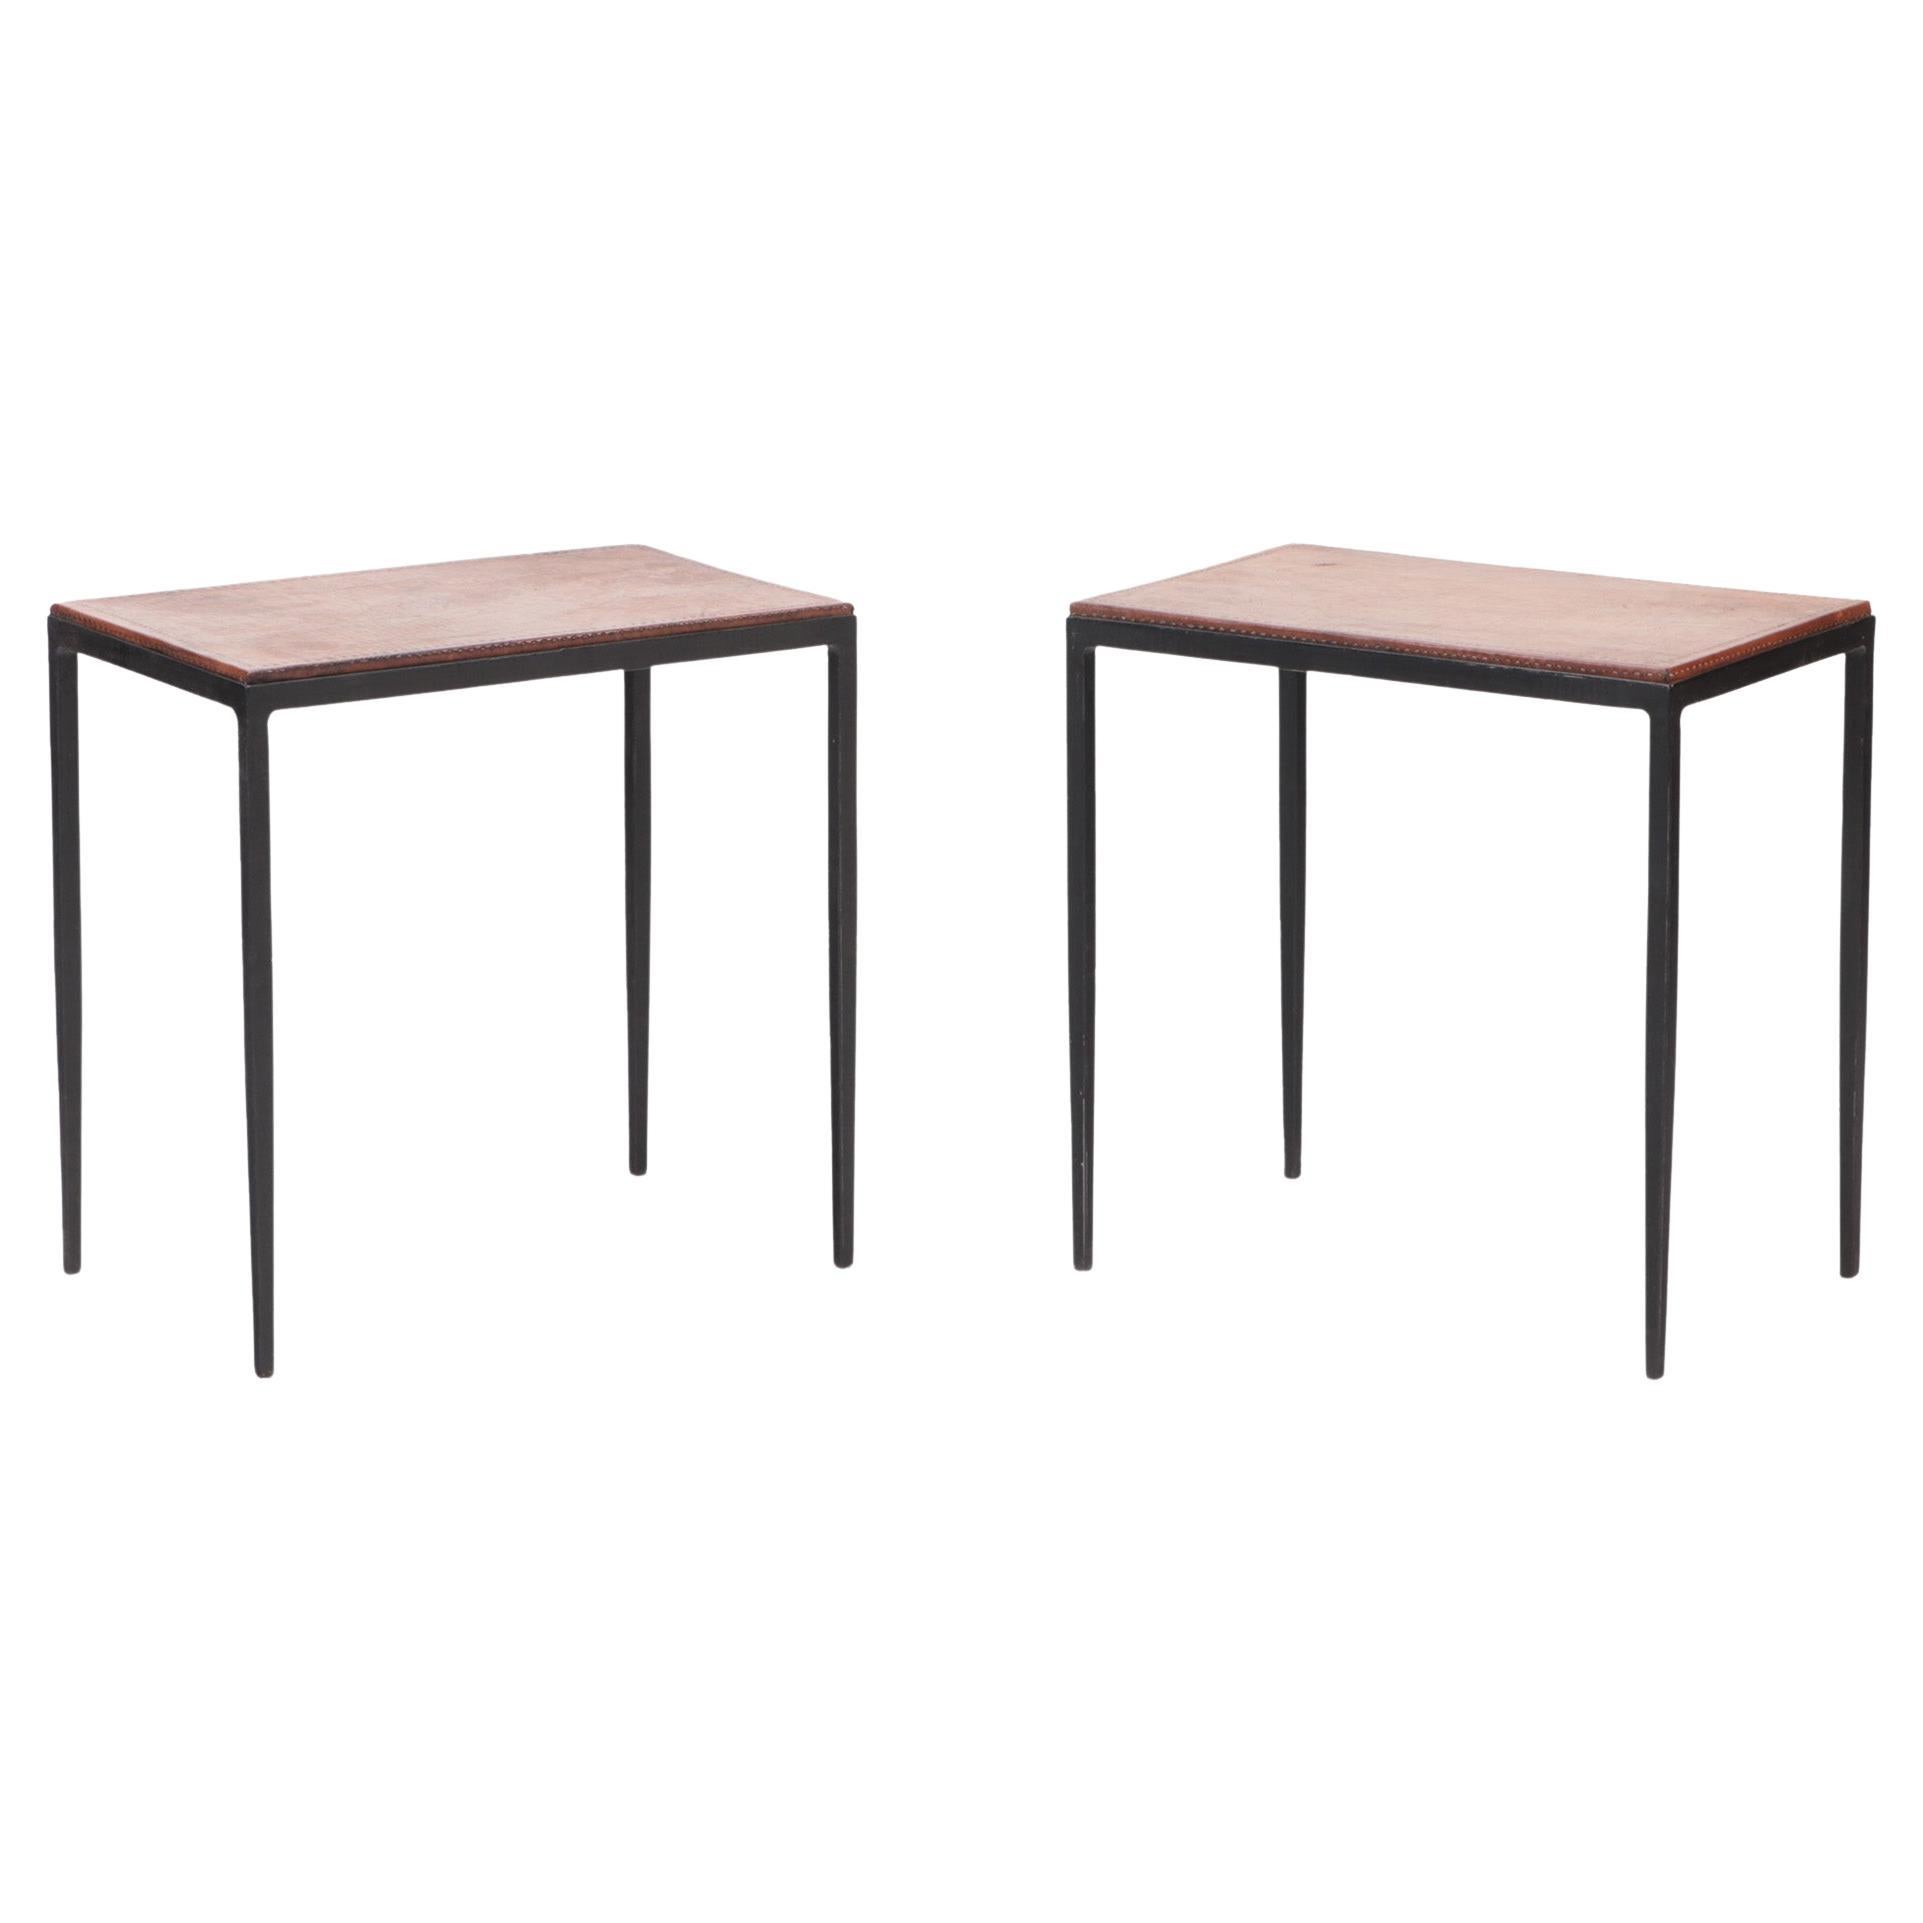 Pair of Iron and Leather Tops Small Console Tables or End Tables, Contemporary